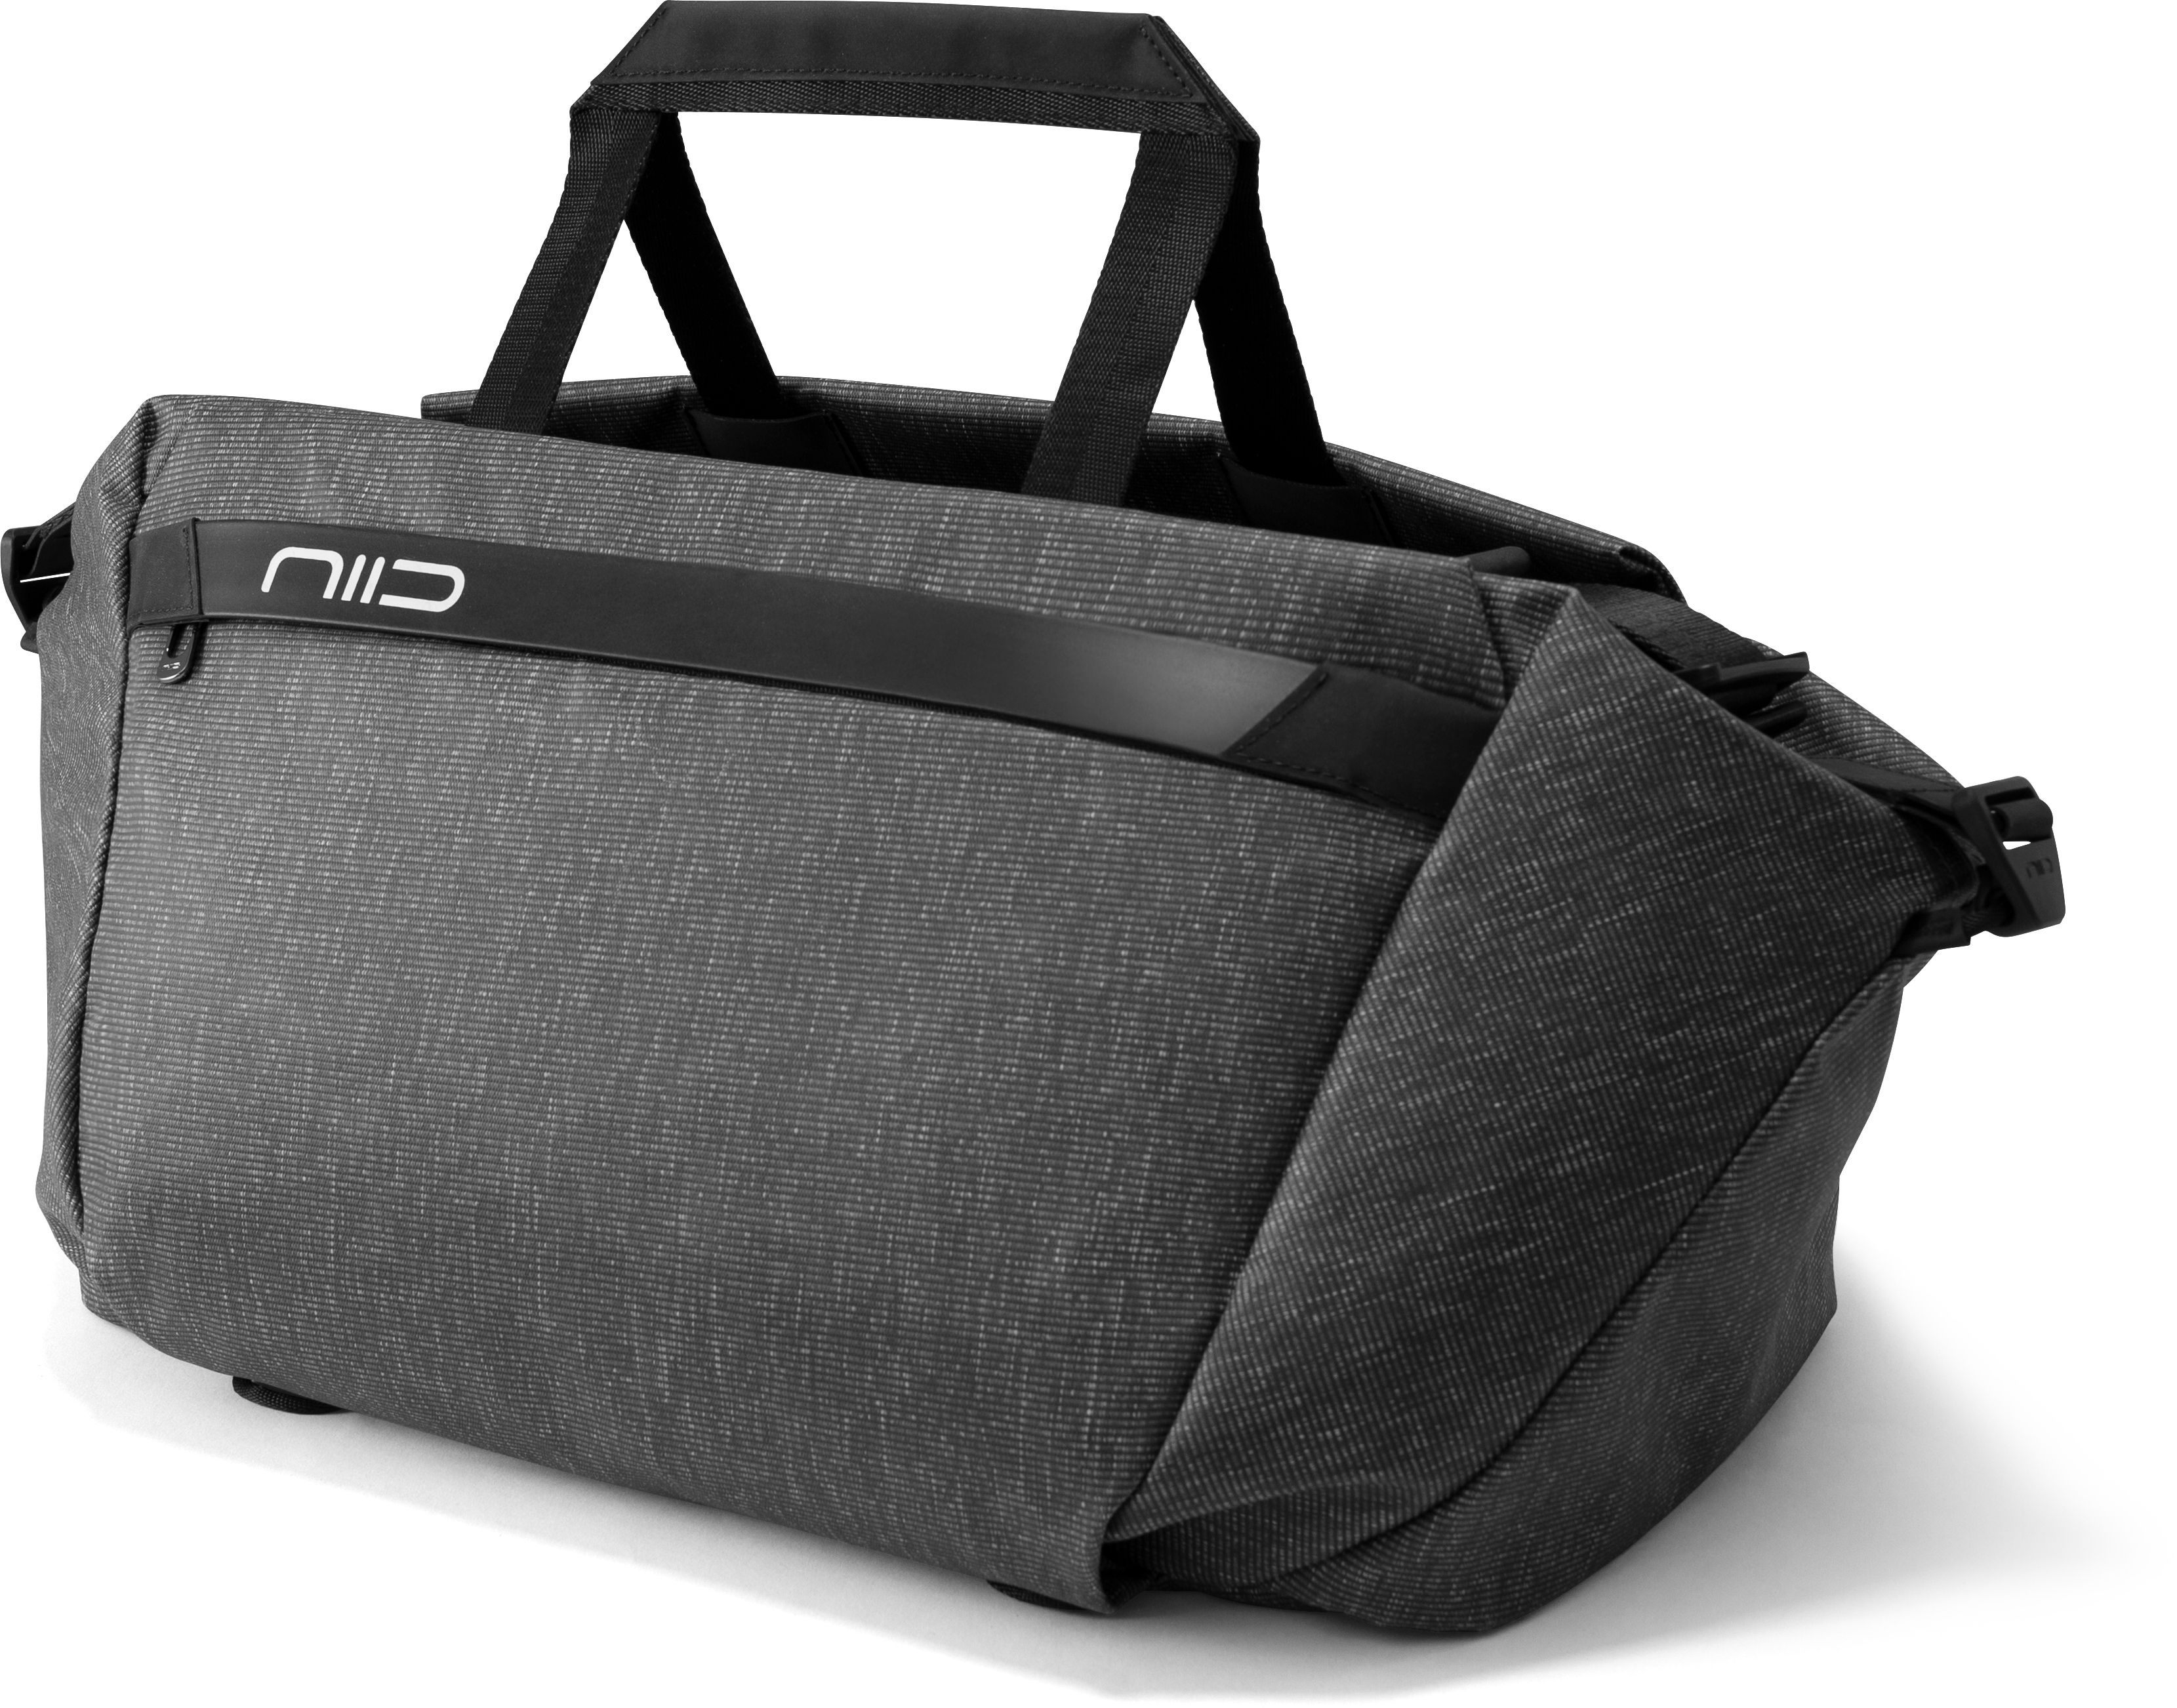 Cache Hybrid Tech Sling and Duffle